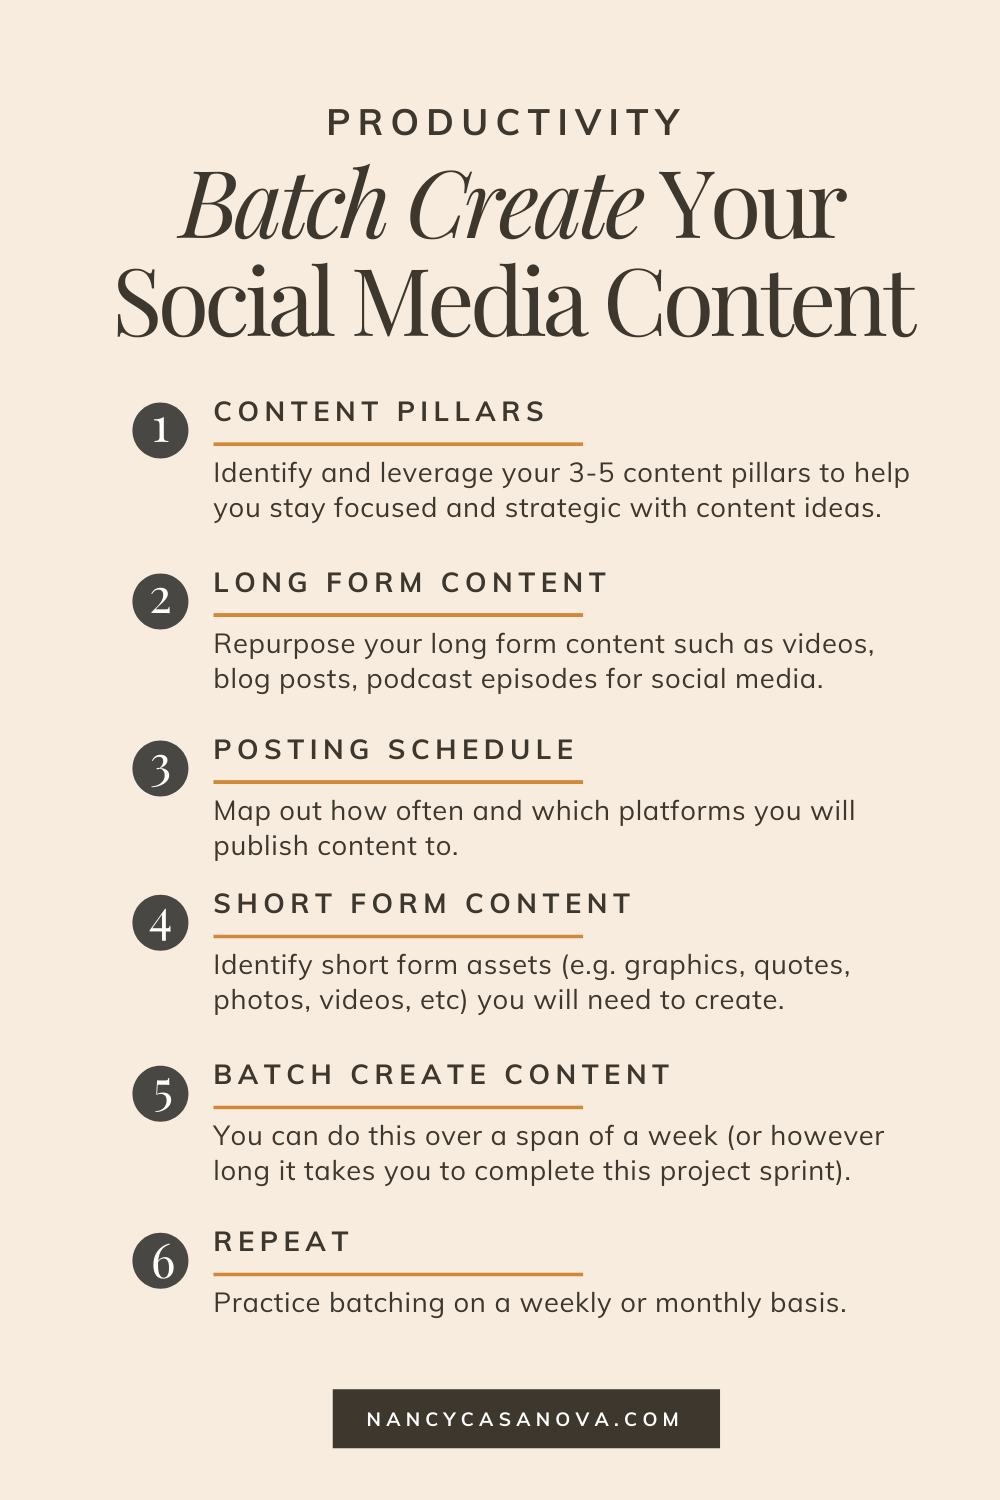 Check out these content batching tips that will help you save time and stay consistent on social media. content batching, batching your content creation, batch creating content